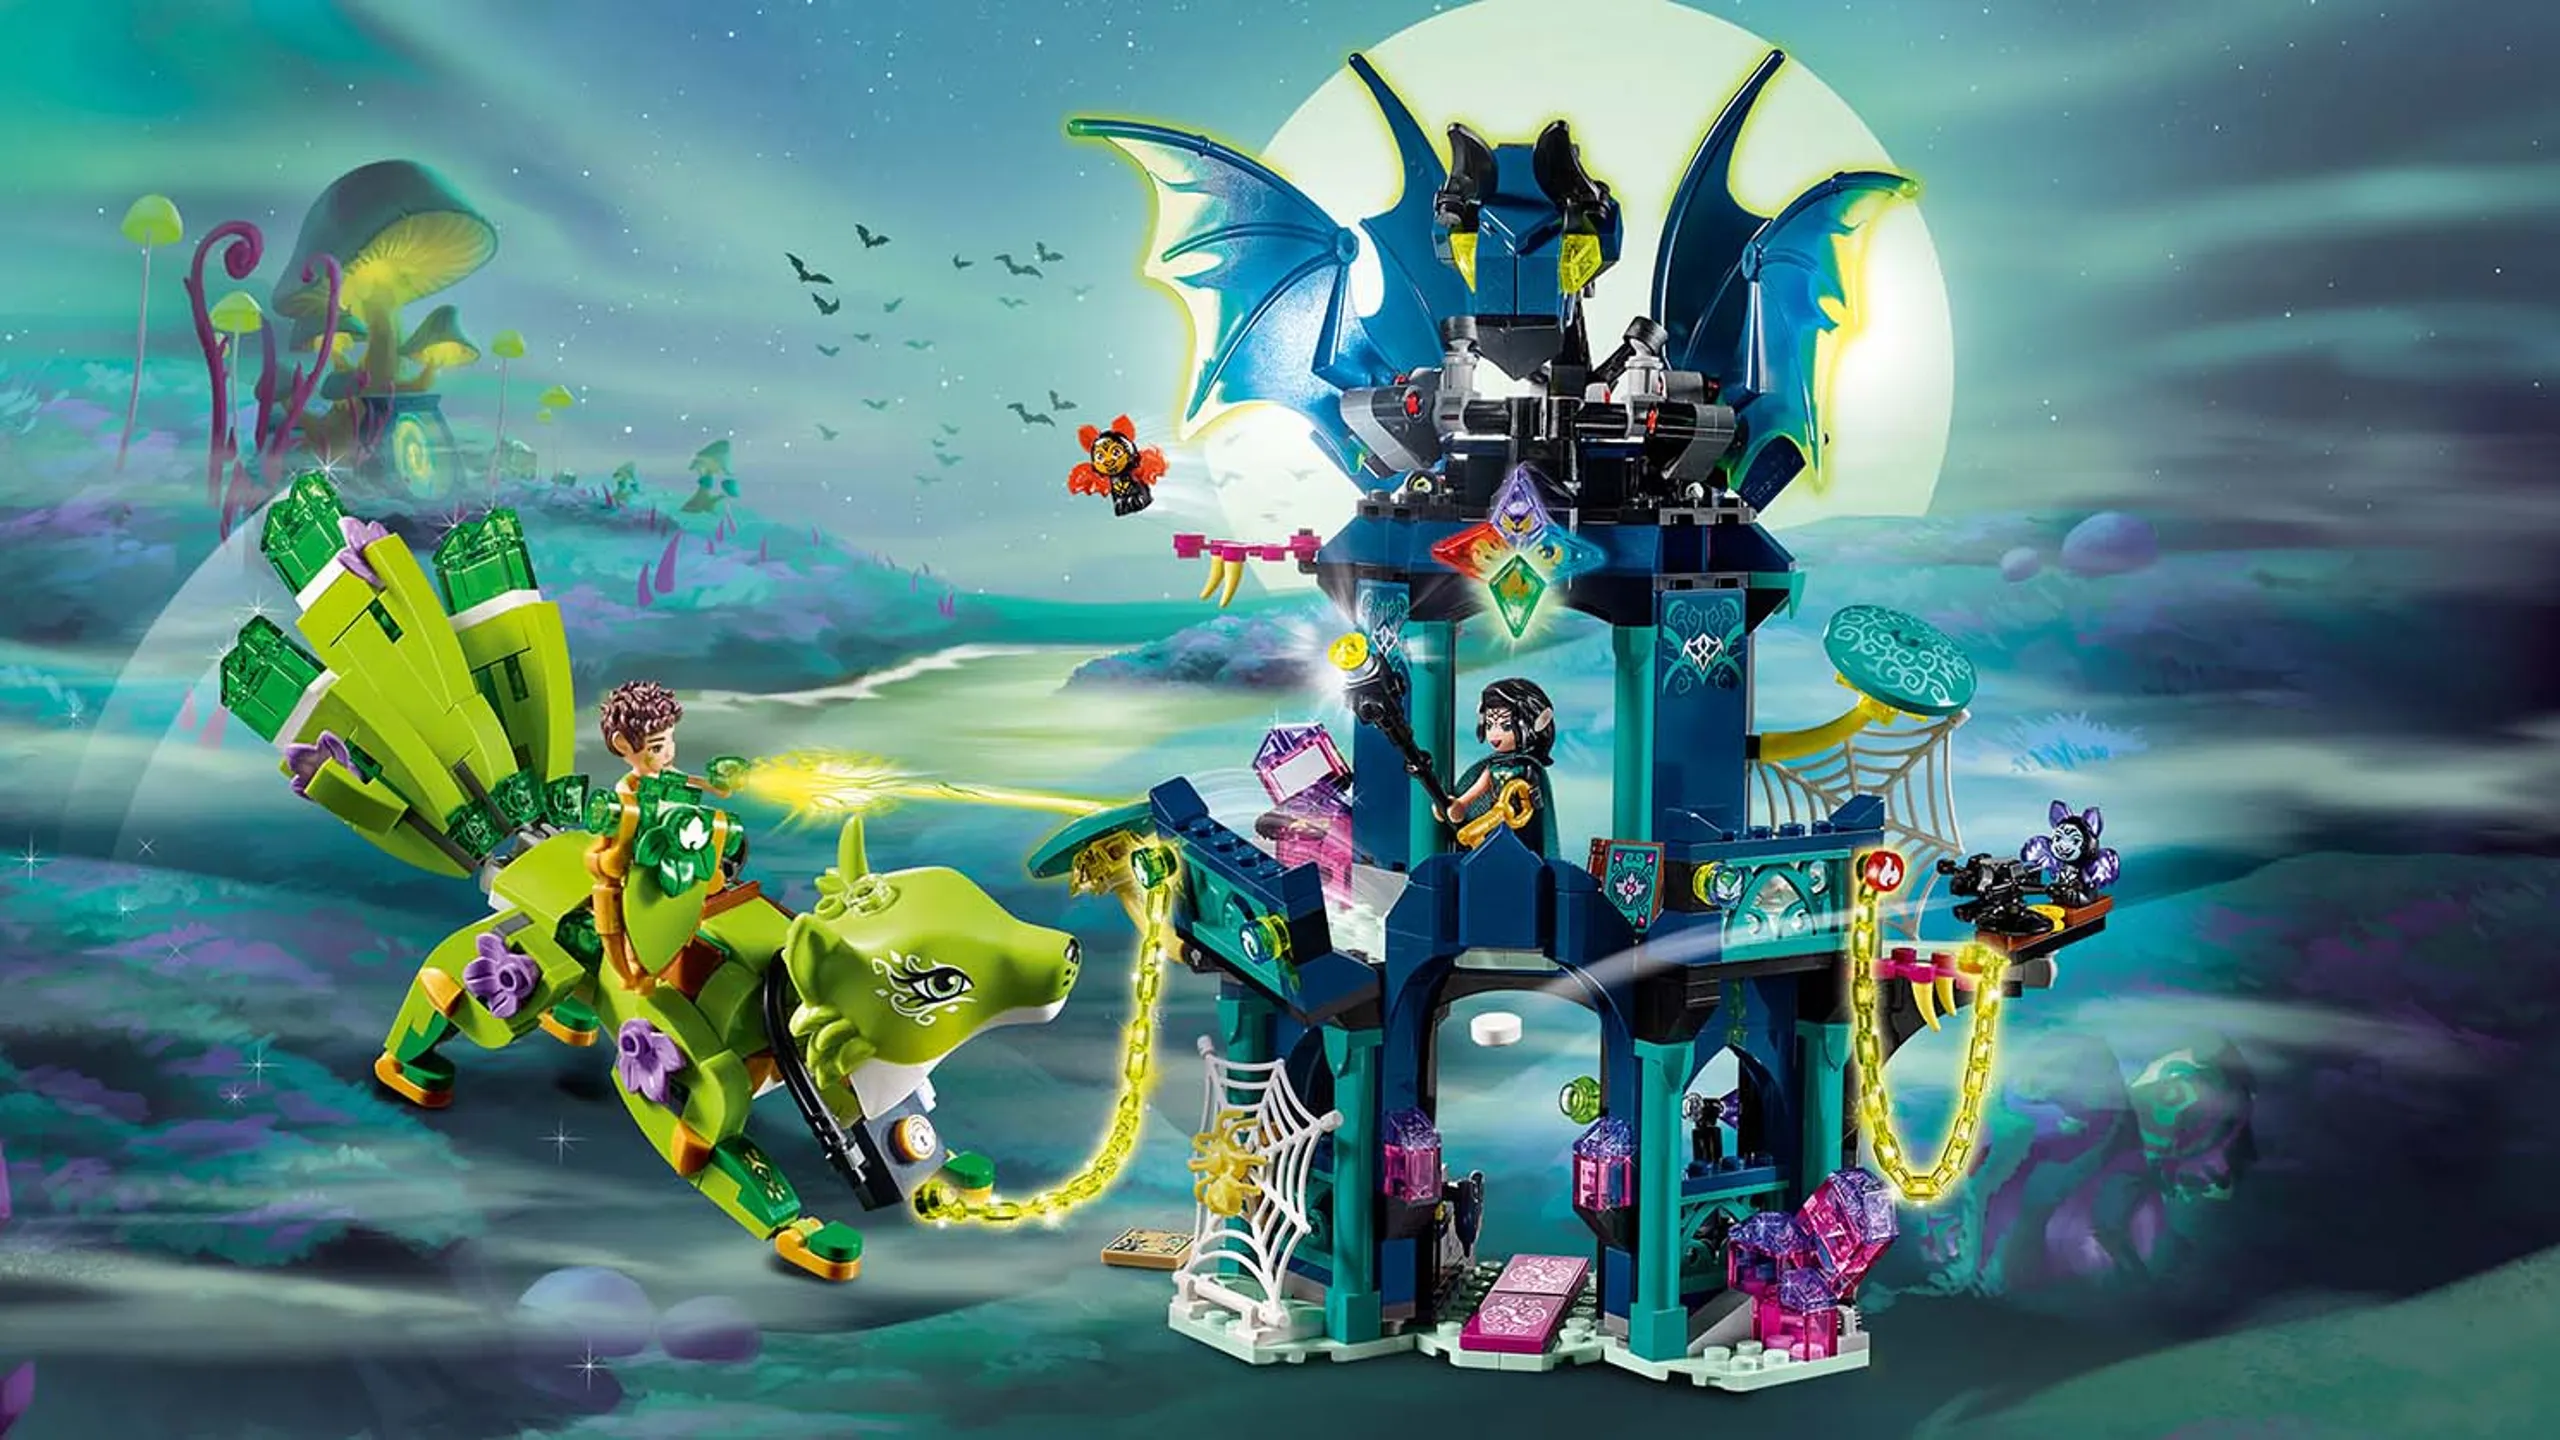 LEGO Elves - 41194 Noctura's Tower & the Earth fox Rescue - Farran is trying to rescue Liska the Guardian Earth Fox that has been captured by Noctura and chained to her Tower of Shadows.